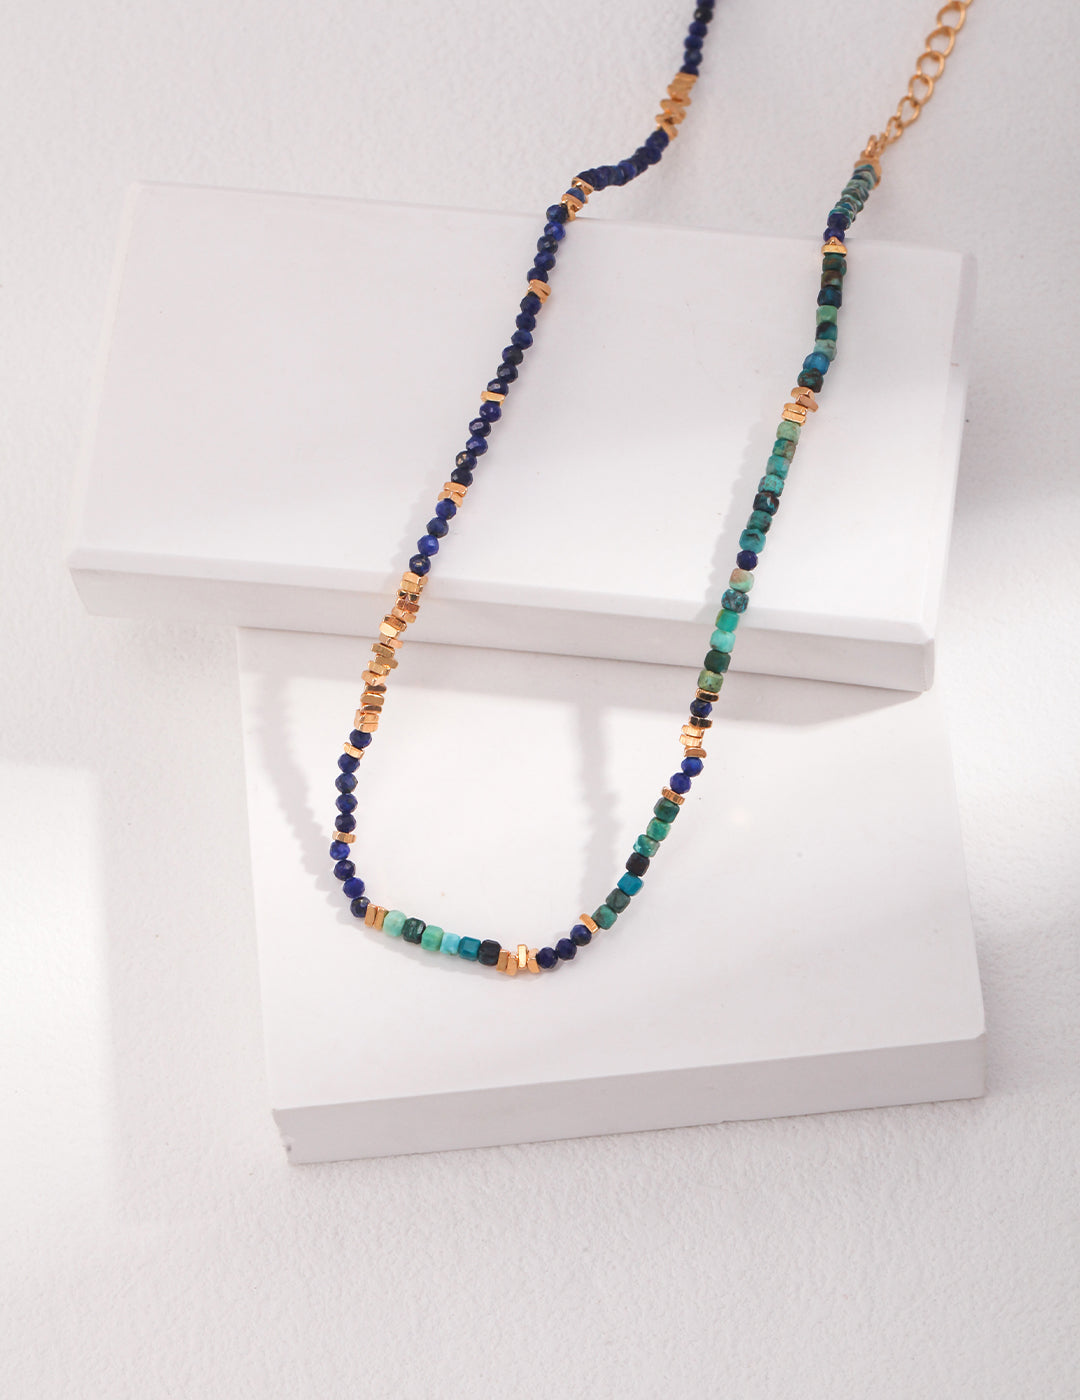 Blue and Green Lapis Lazuli Beads Choker with Gold Accents by Señorita J